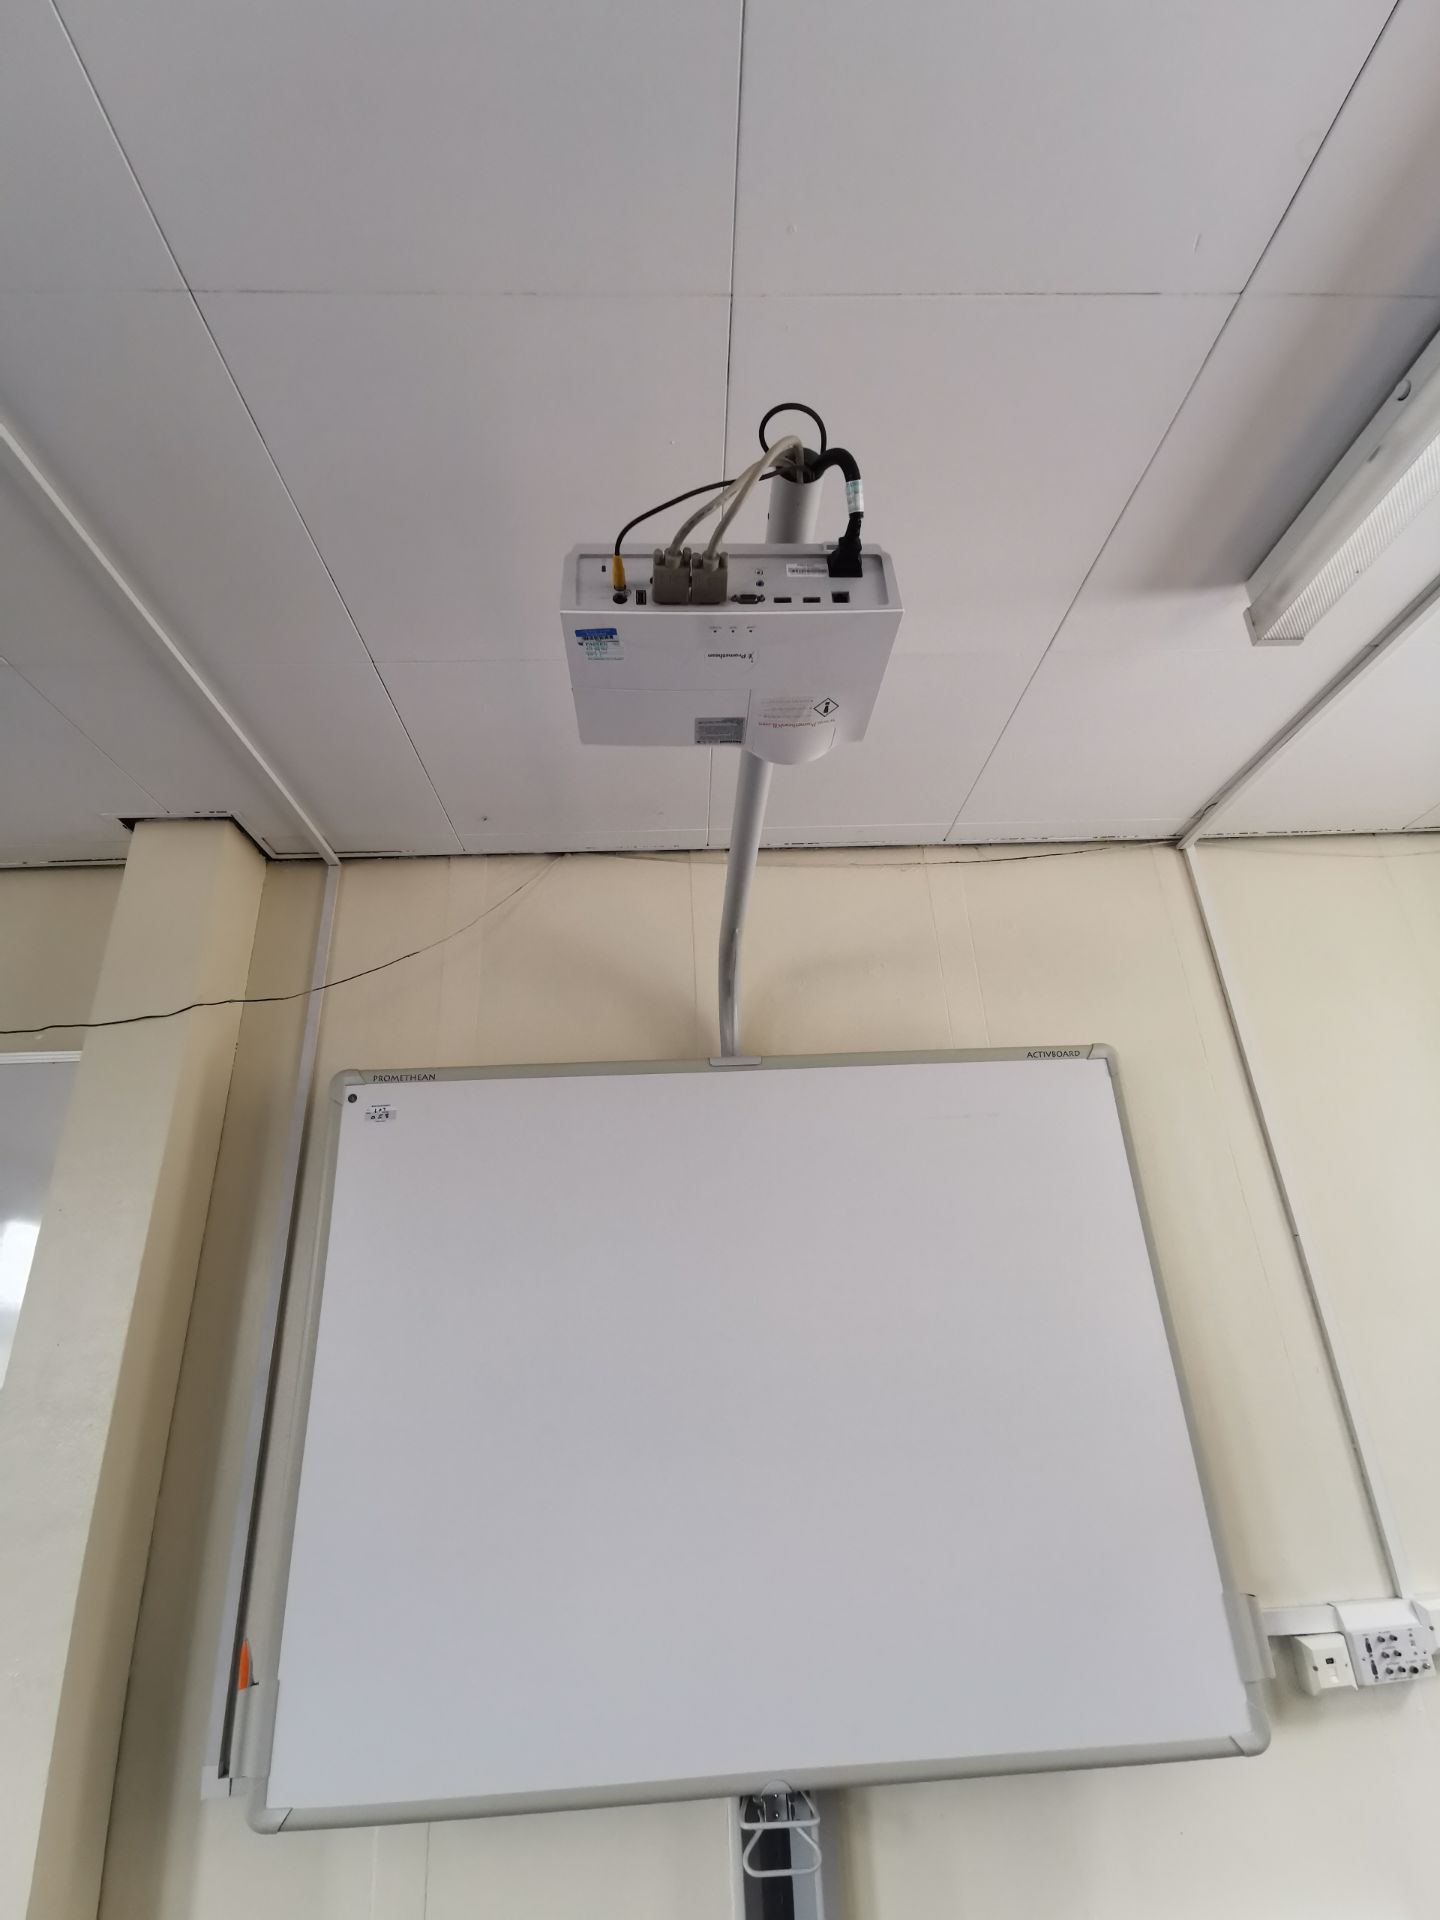 Promethean active board with projector [on stand]